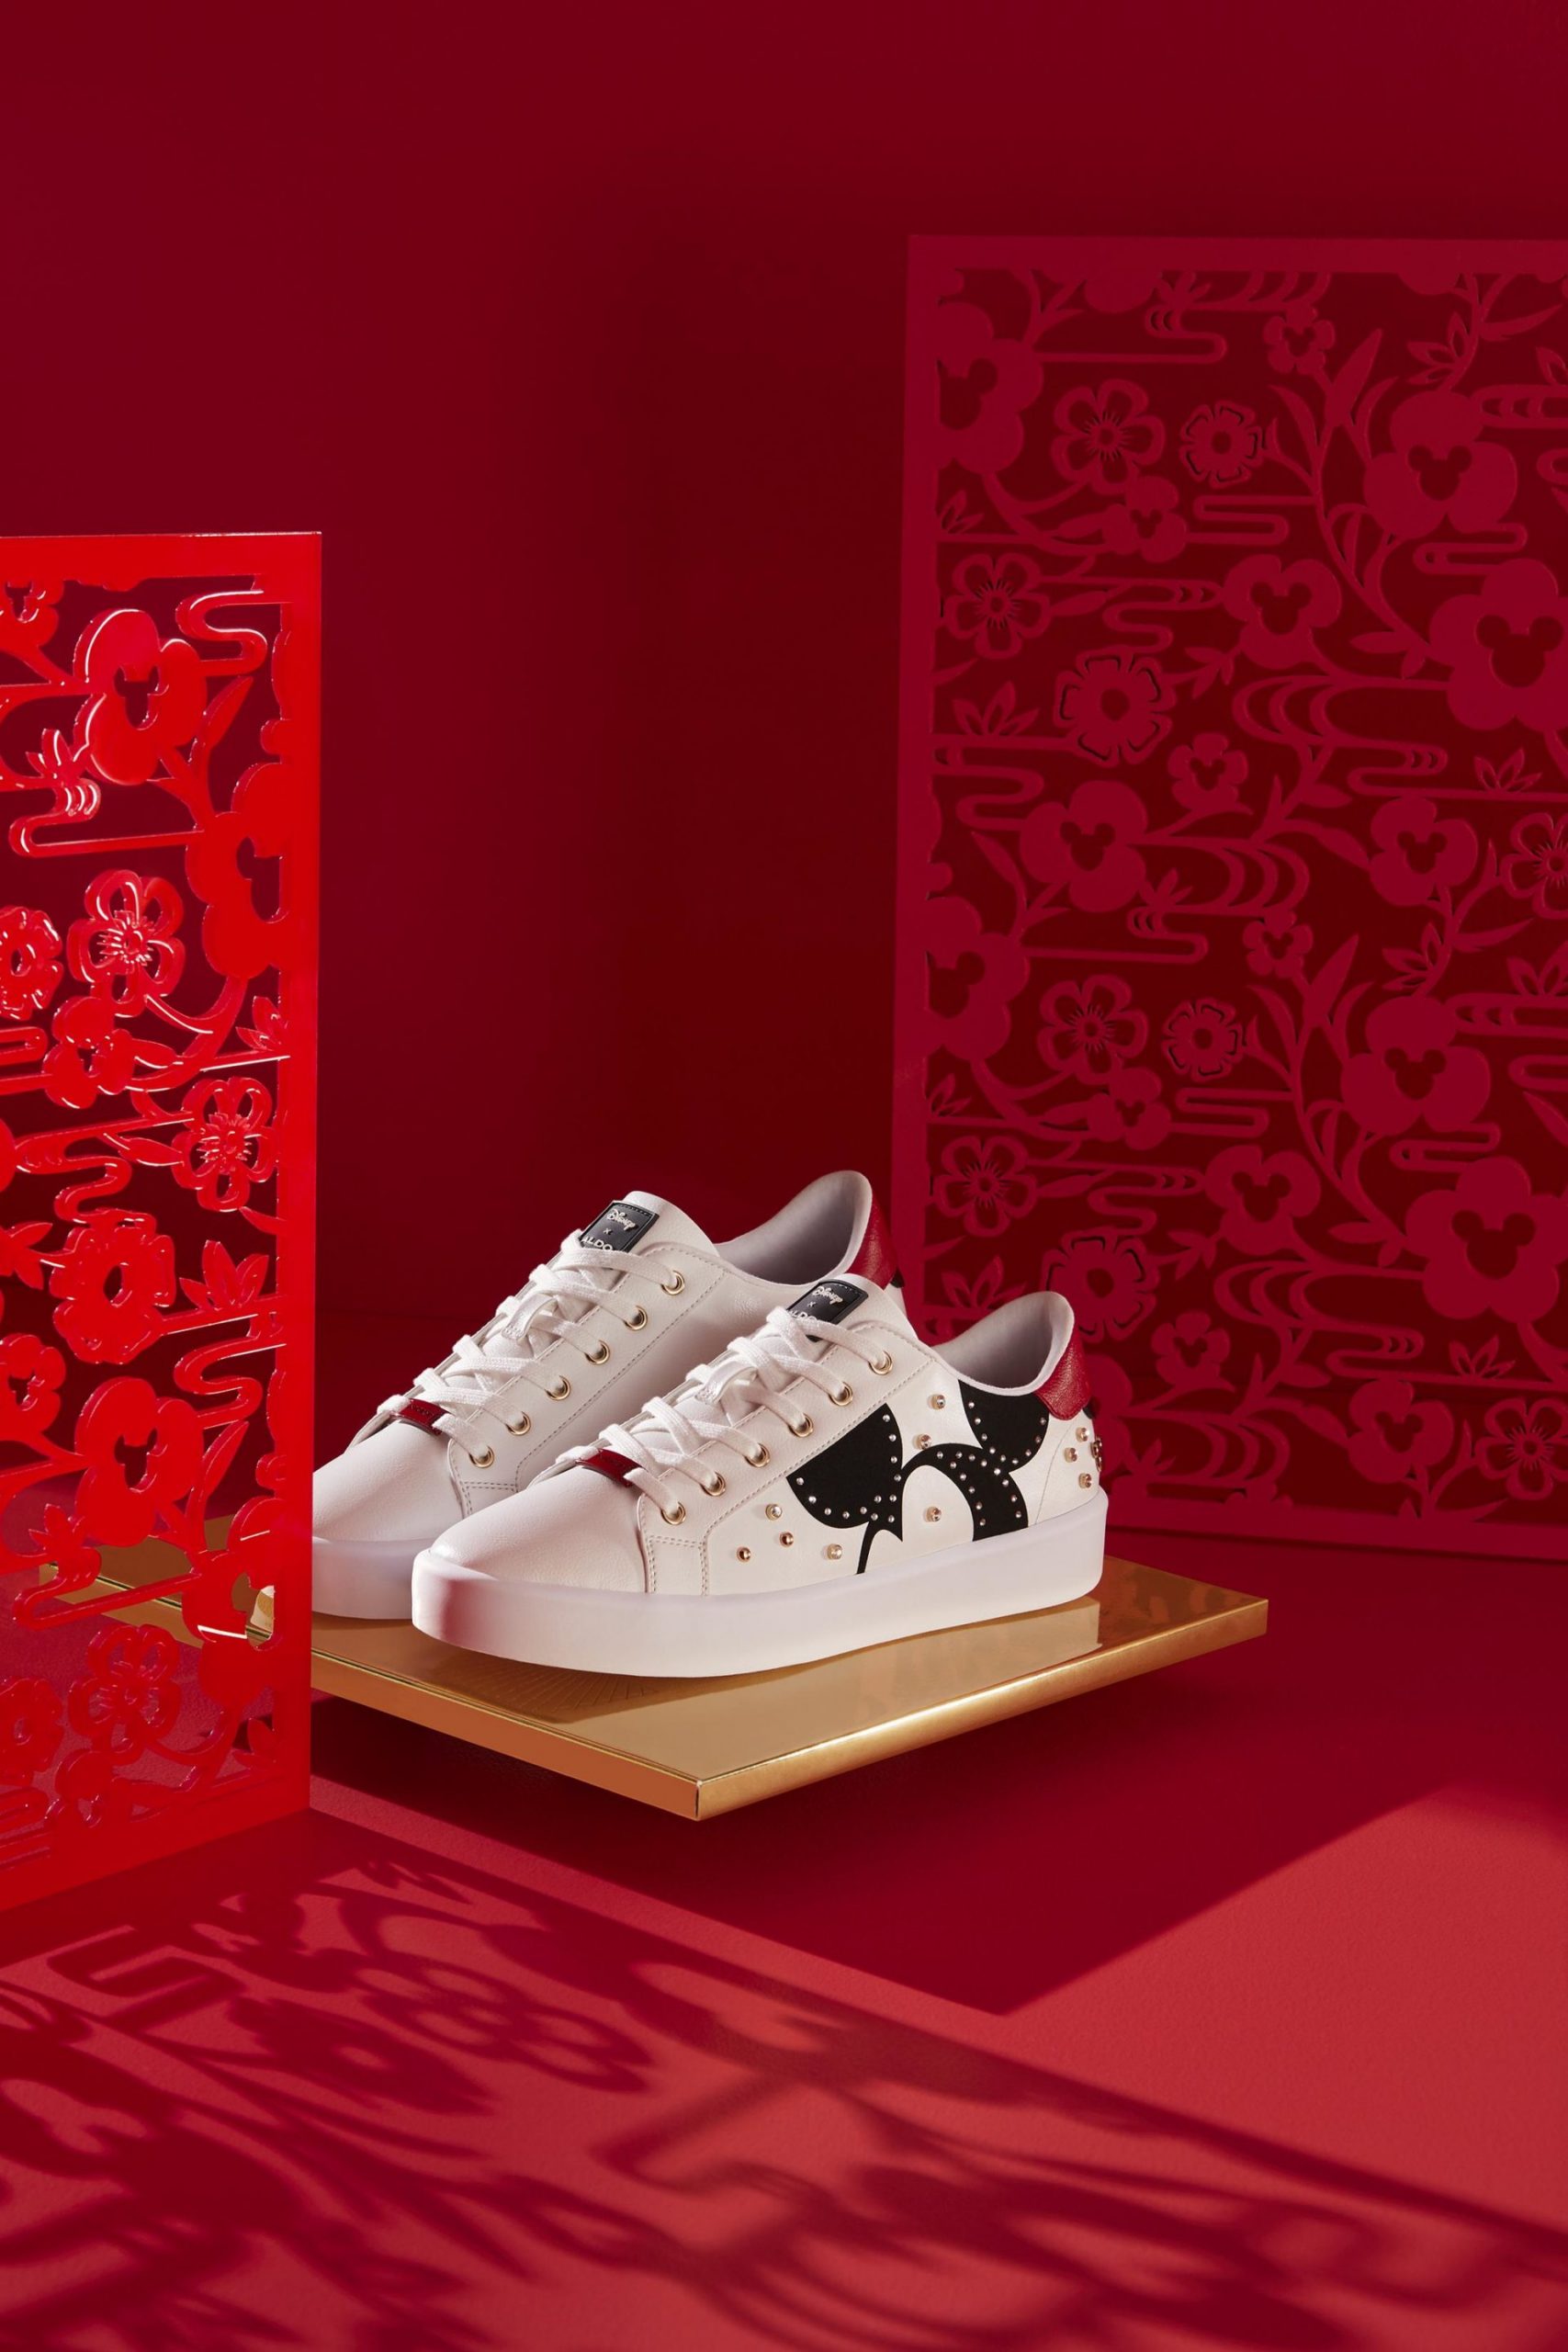 ALDO Releases CNY Mickey Mouse-Themed 